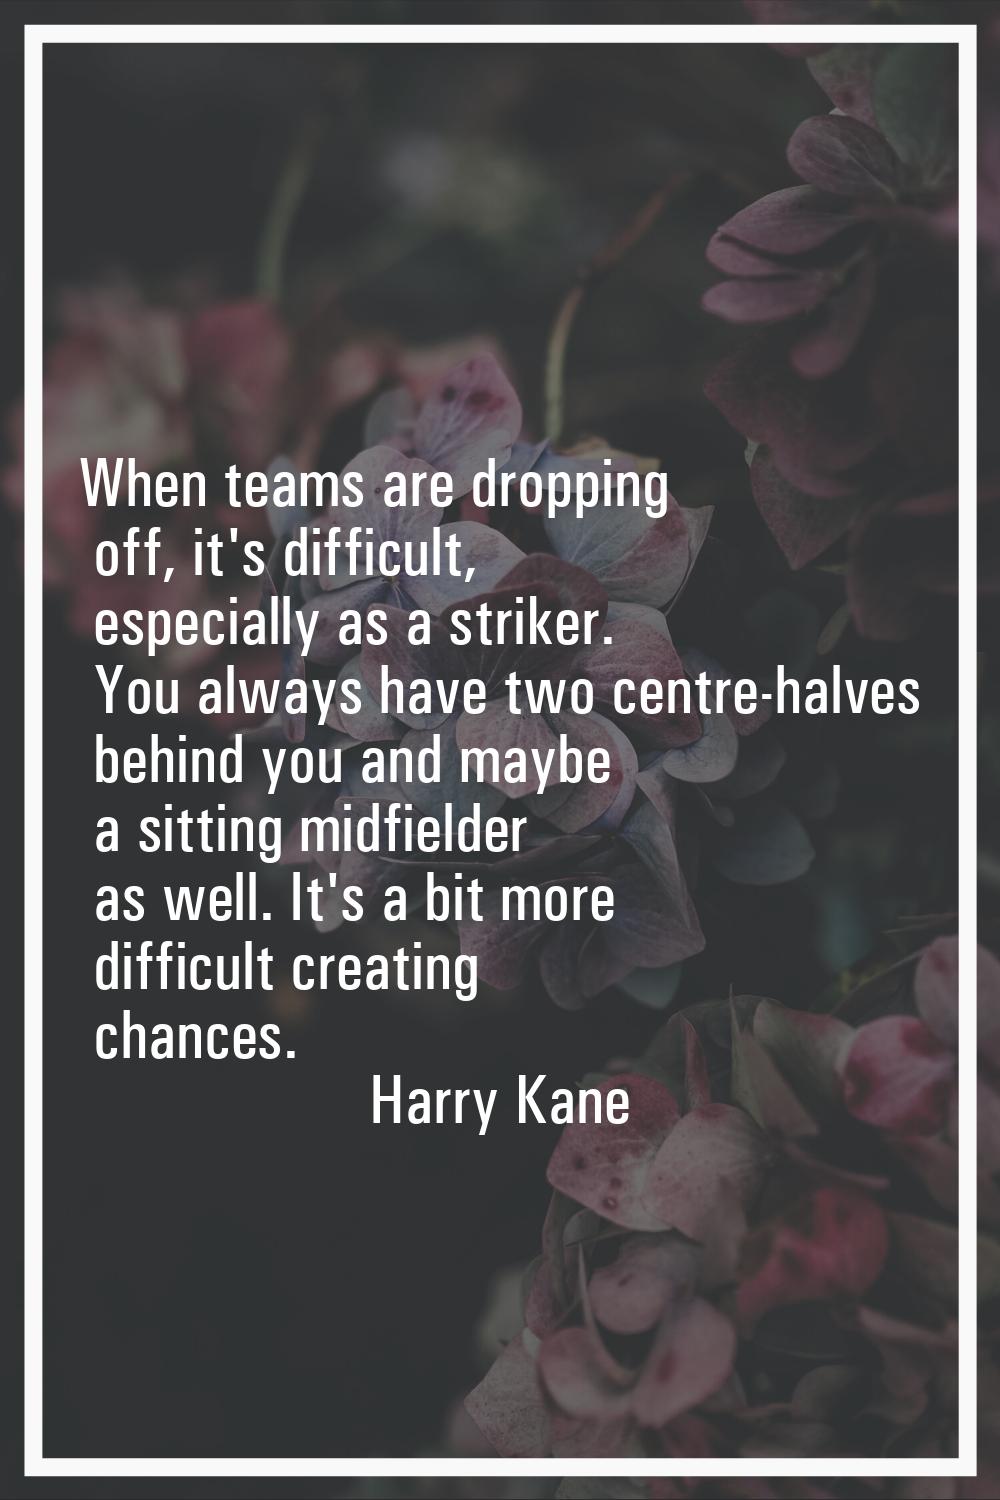 When teams are dropping off, it's difficult, especially as a striker. You always have two centre-ha